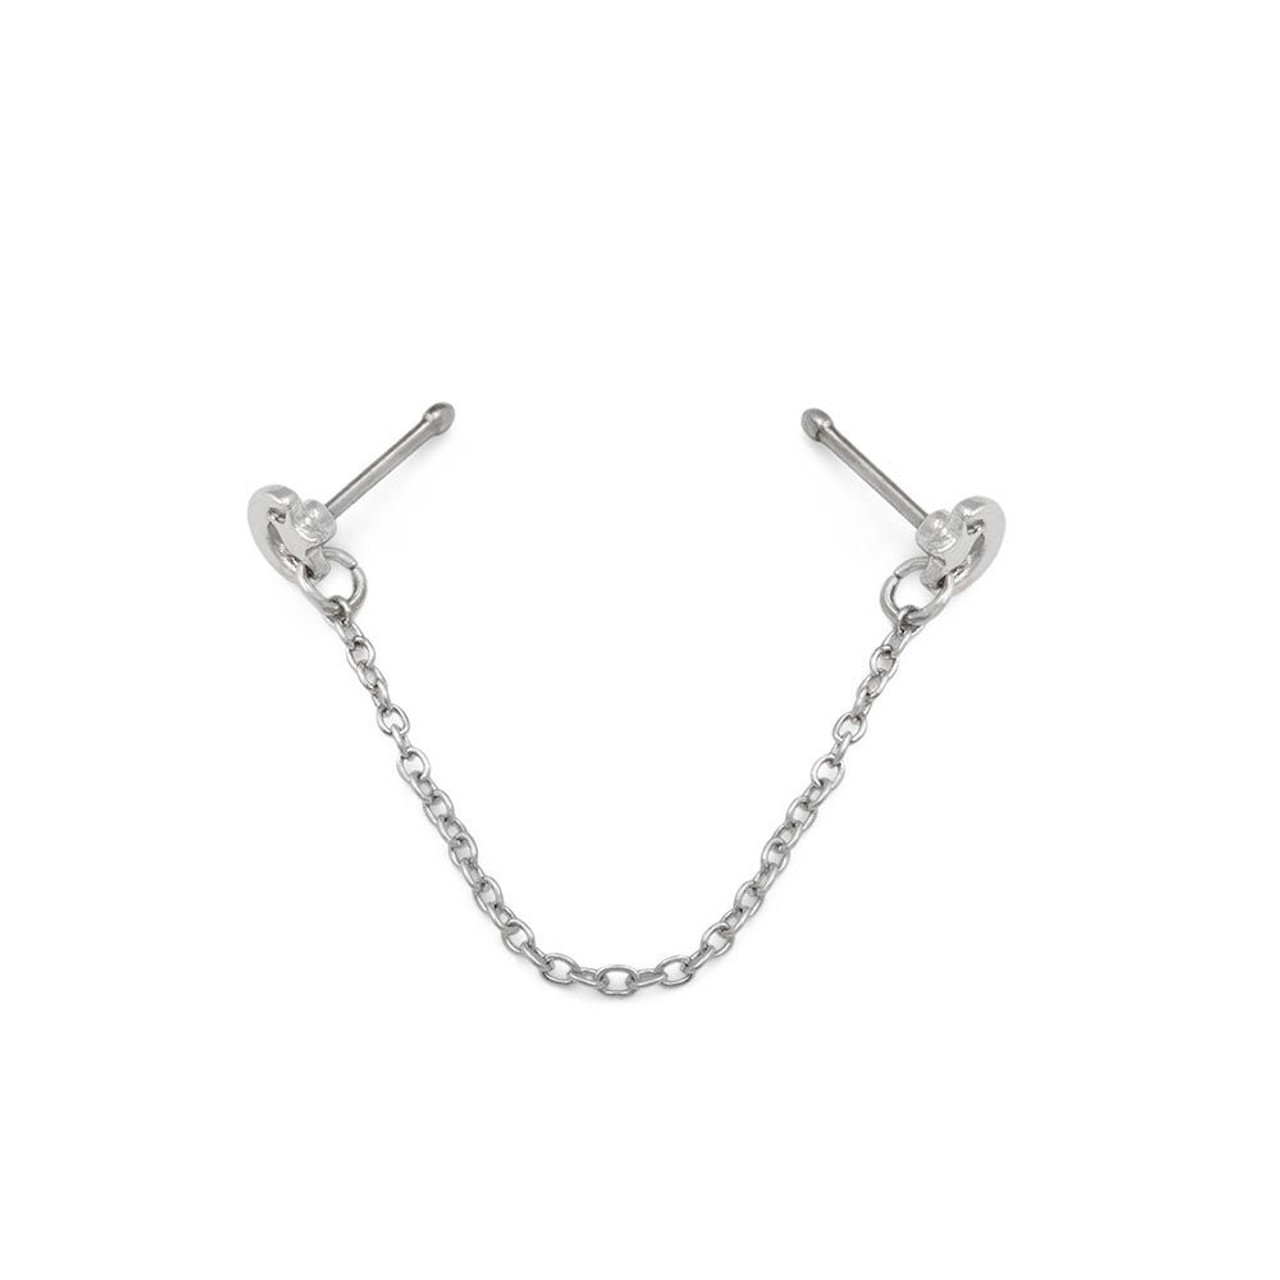 Star and Moon Nose Bones Surgical Steel with Chain 20ga 1/4 - Double Nose  Piercings - Out of Stock